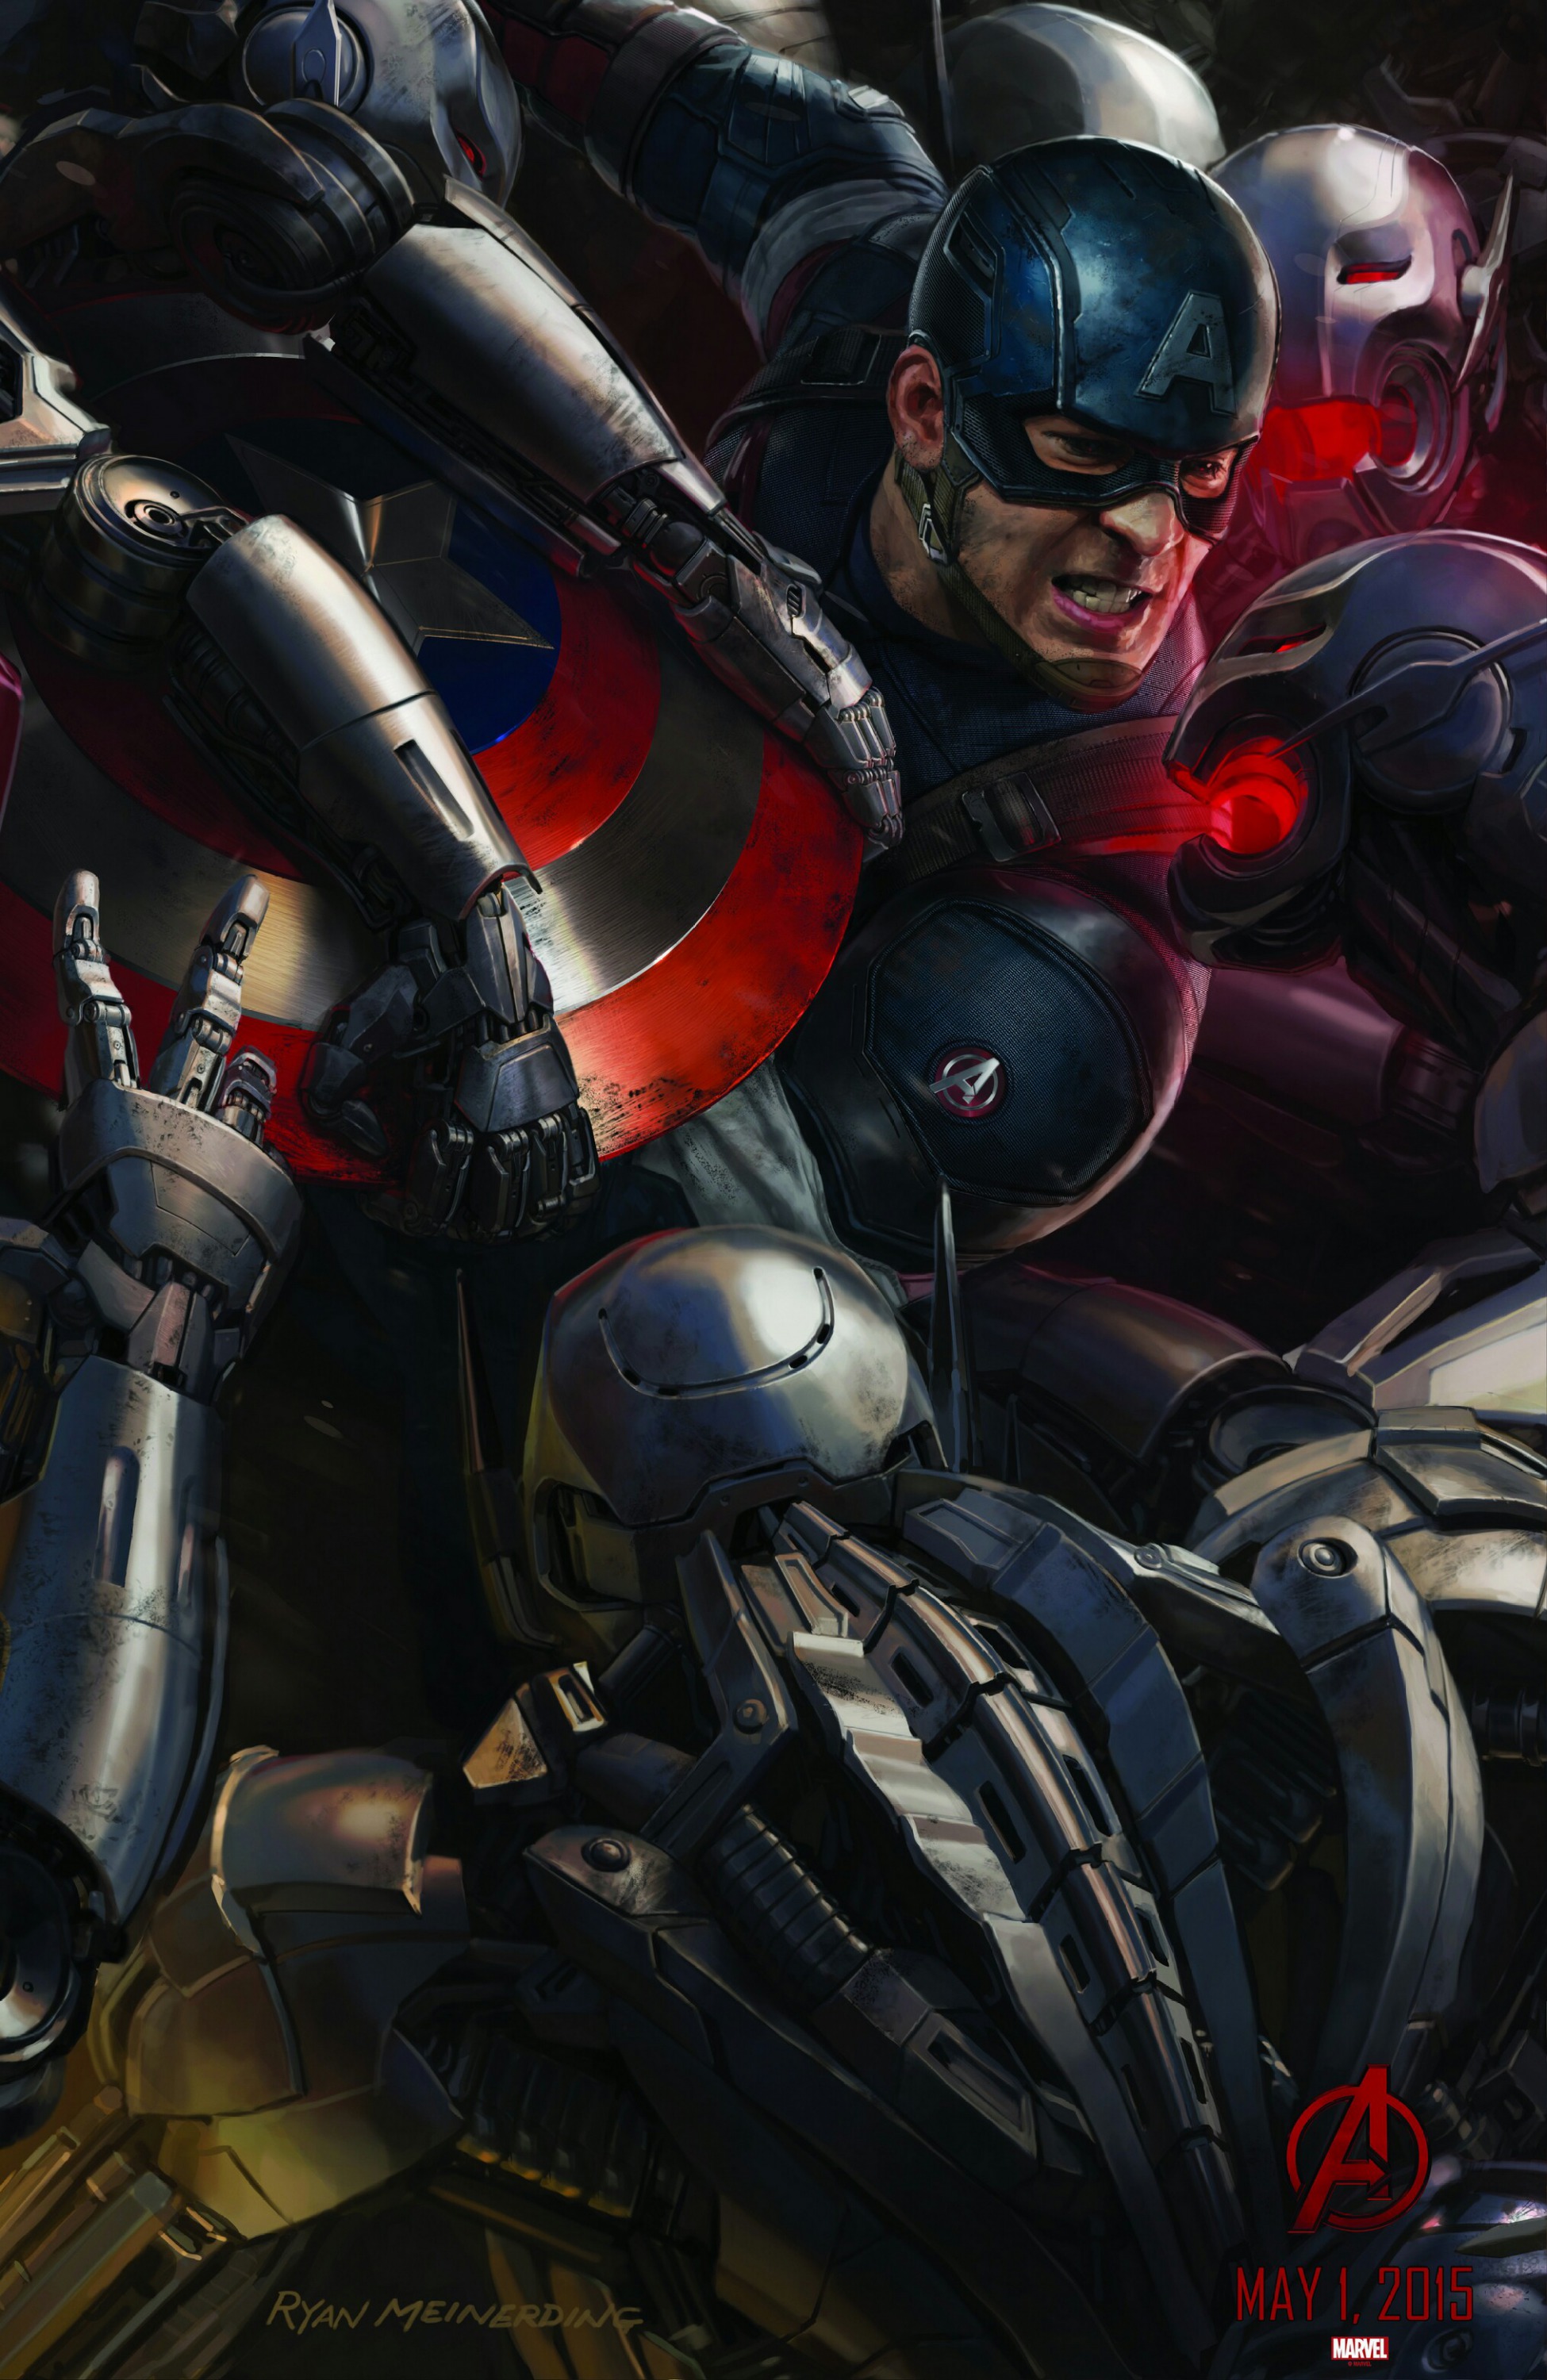 Mega Sized Movie Poster Image for Avengers: Age of Ultron (#7 of 36)